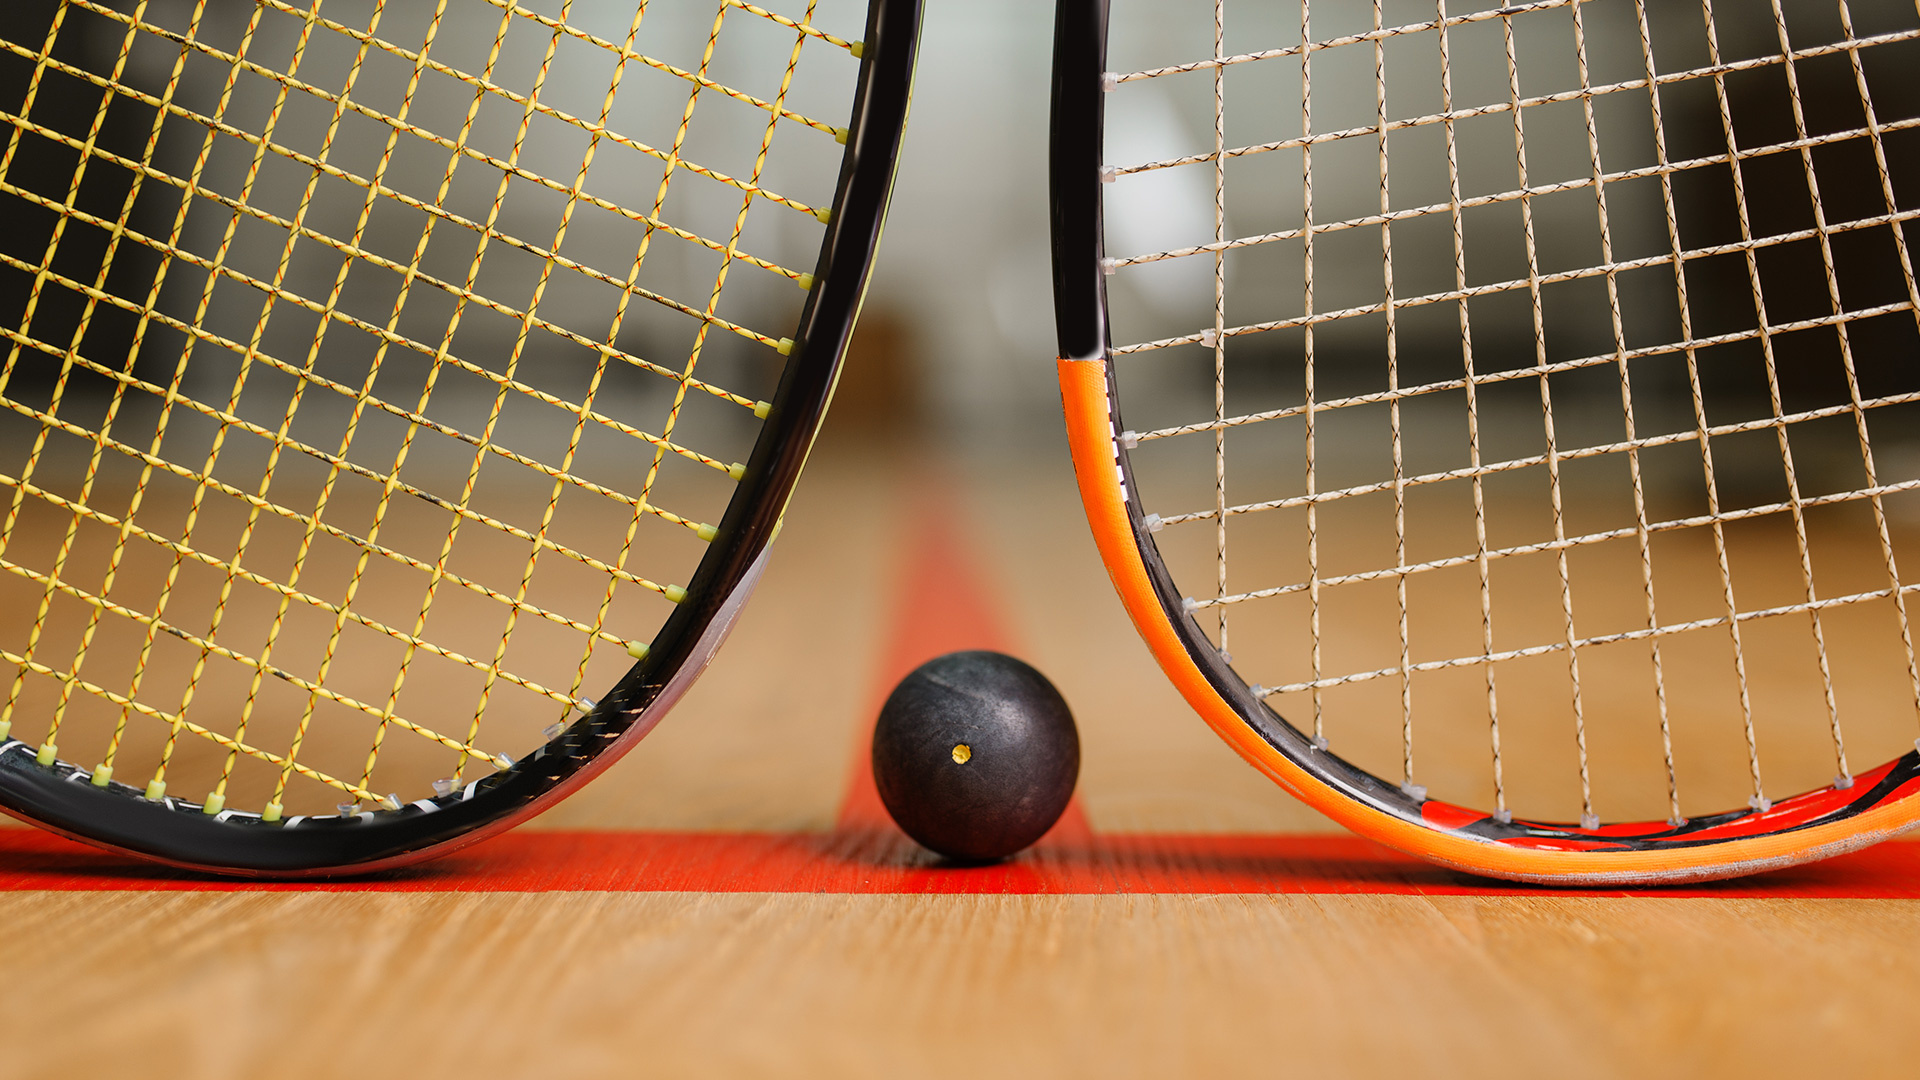 Squash (Sport): A Racket and Ball Sport Played in a Four-Walled Court With a Small Rubber Ball. 1920x1080 Full HD Wallpaper.